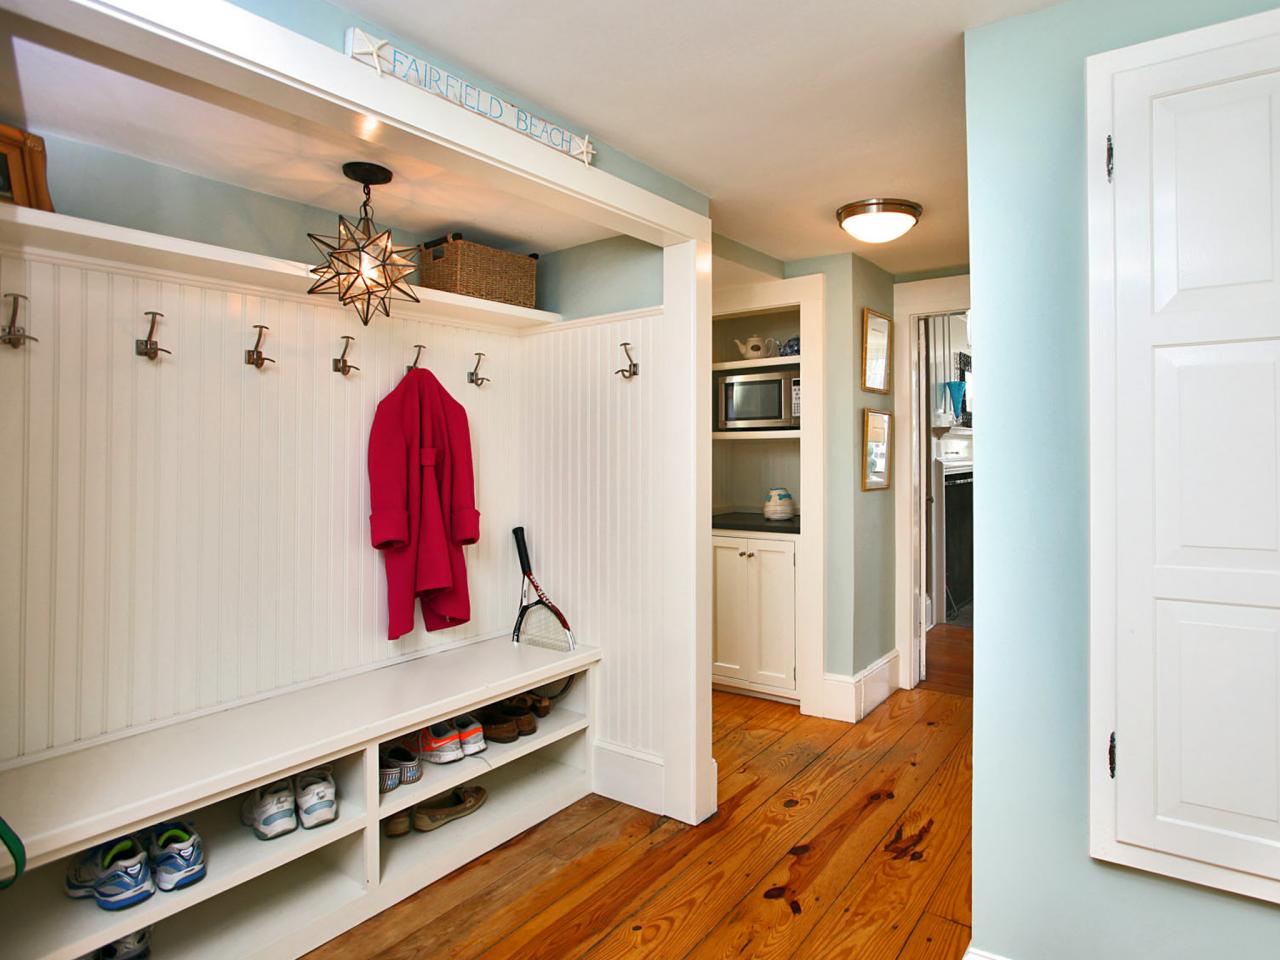 Mudroom Shoe Racks: Pictures, Options, Tips And Ideas | Hgtv